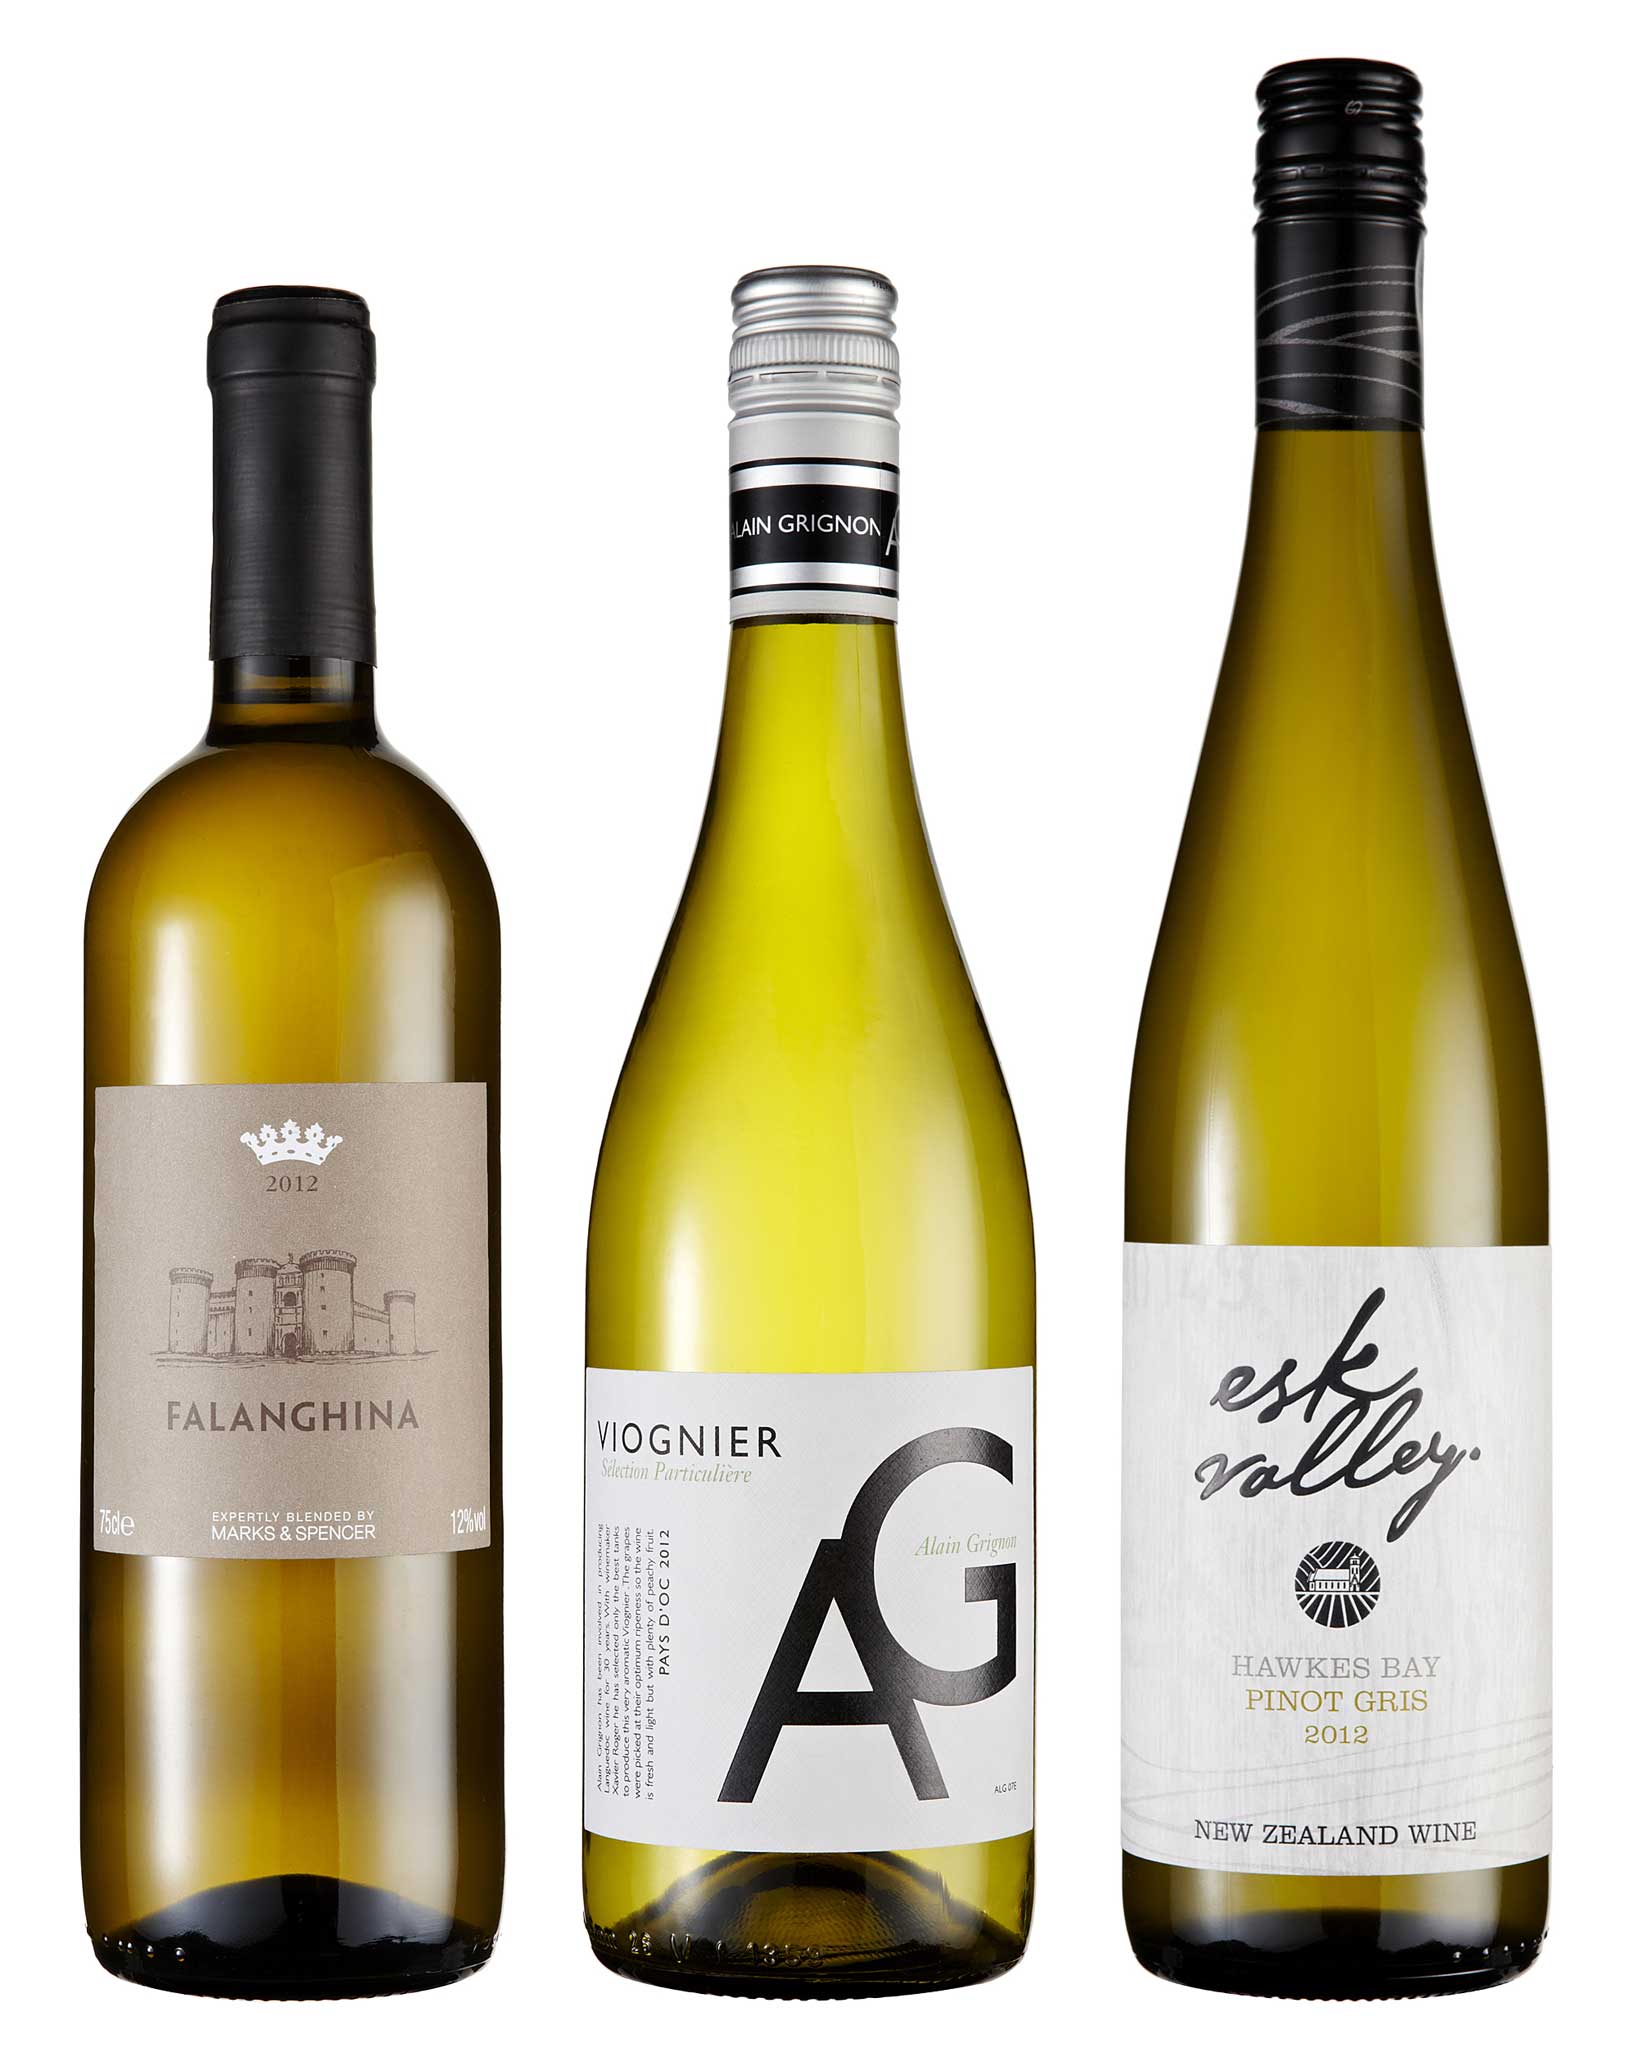 Falanghina Beneventano IGT 2011; Alain Grignon Viognier 2011/12; Esk Valley Hawkes Bay Pinot Gris 2012